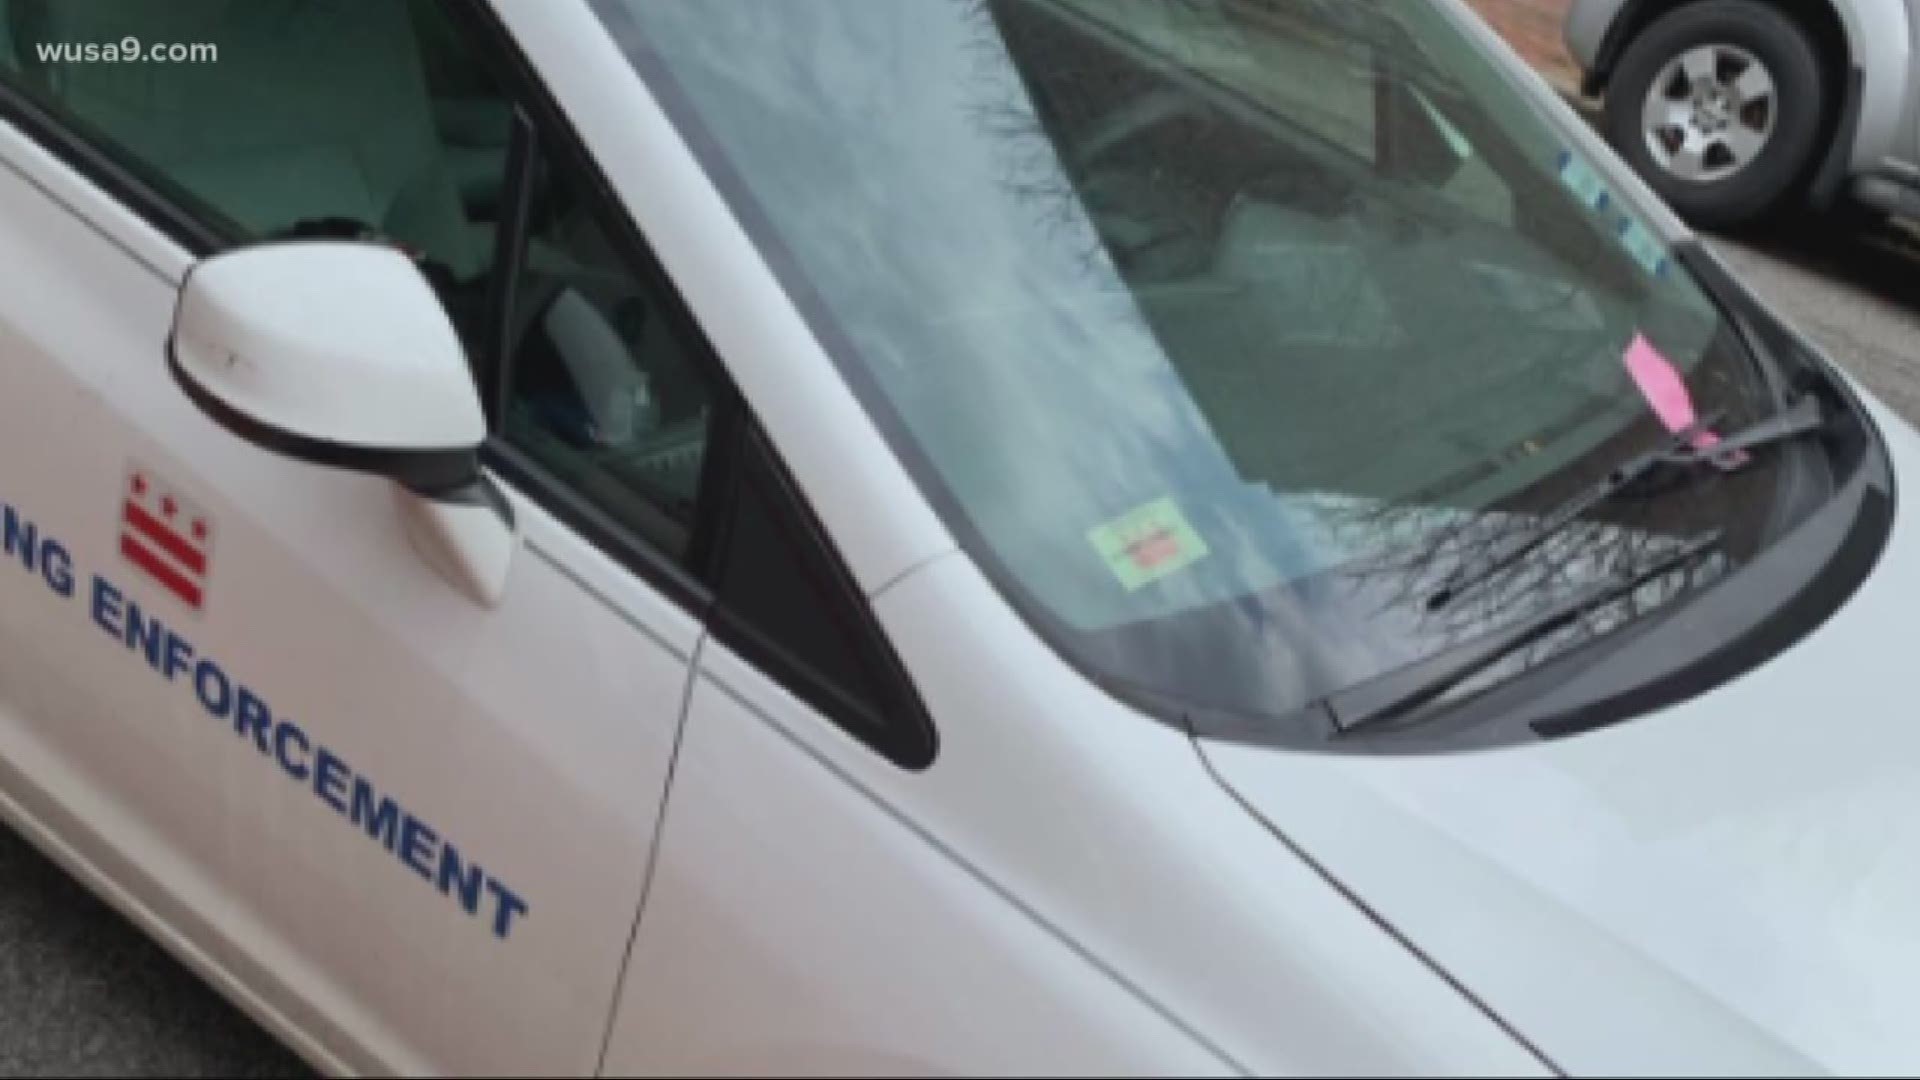 A viewer sent us a photo of a DC parking enforcement car with a ticket on it.